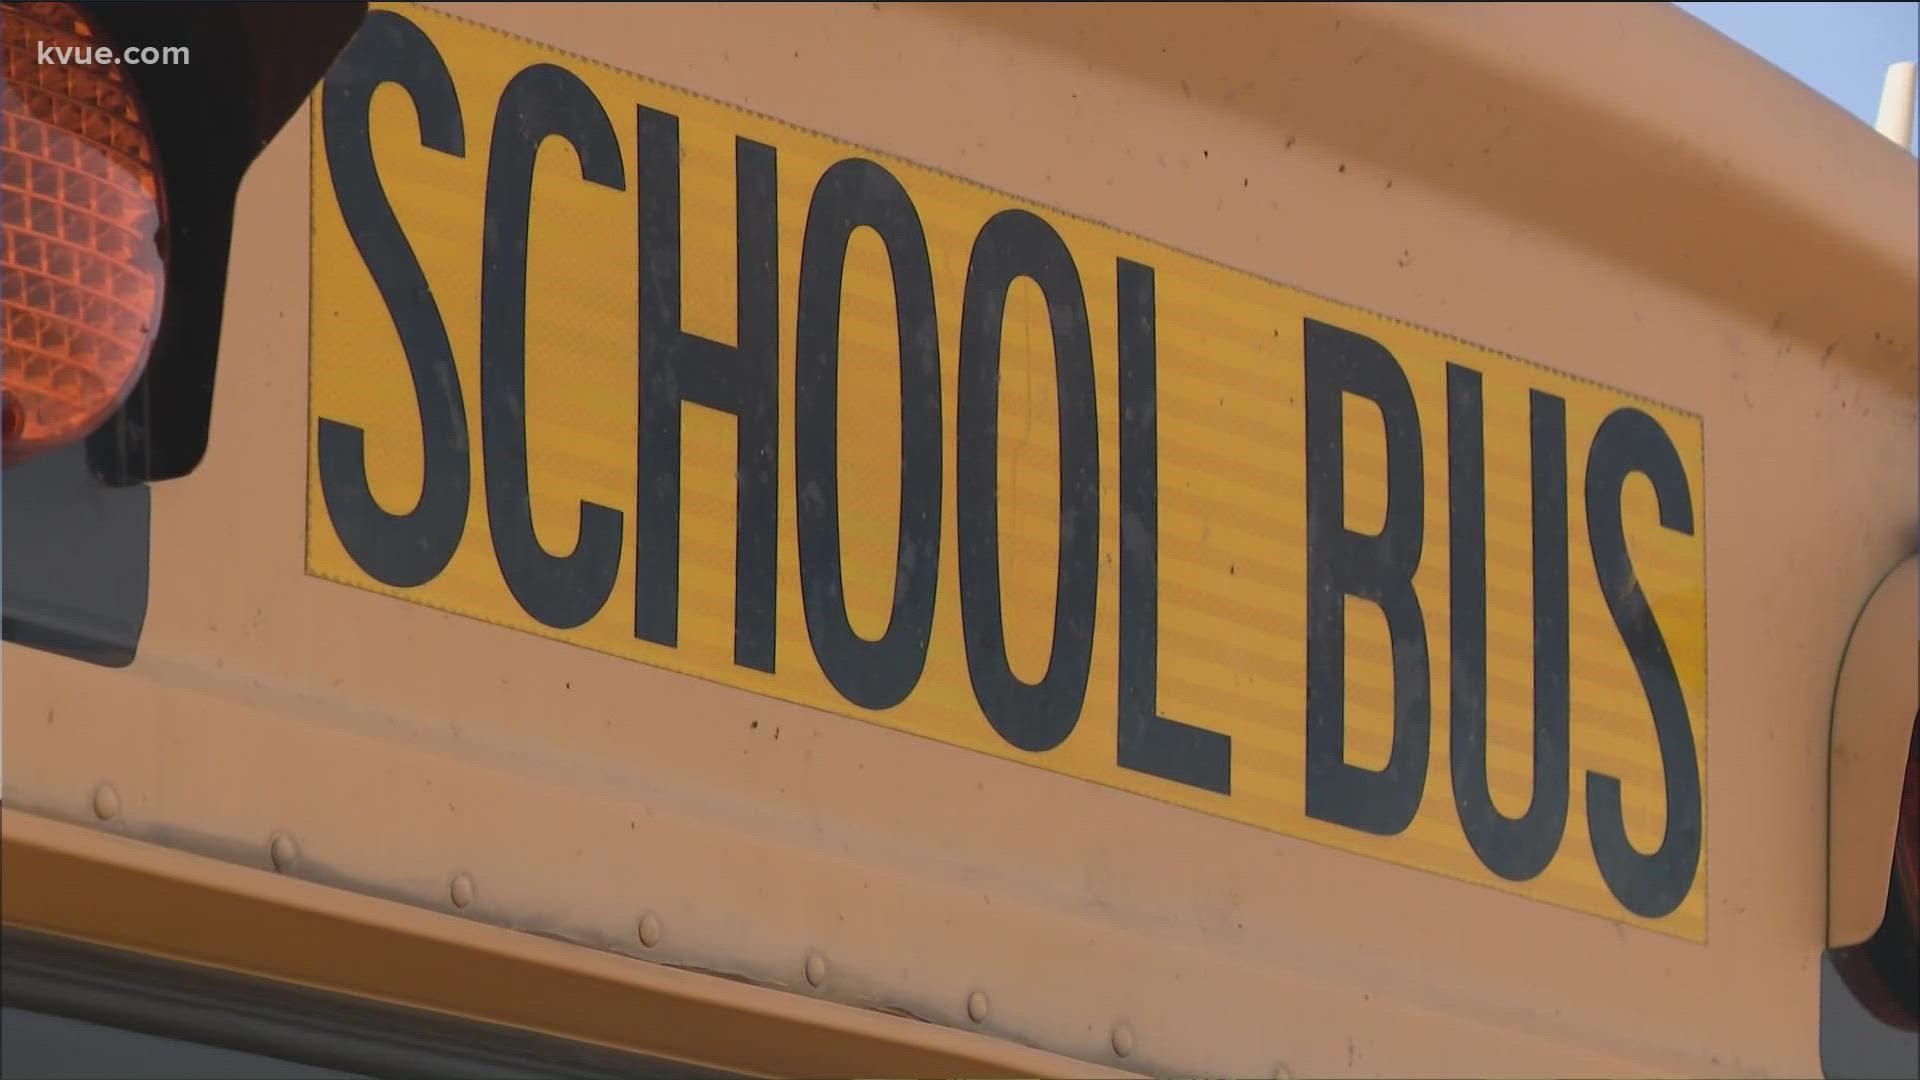 Hutto ISD officials said Sunday that the district would be canceling regular bus routes until further notice, starting on Monday, Jan. 10.